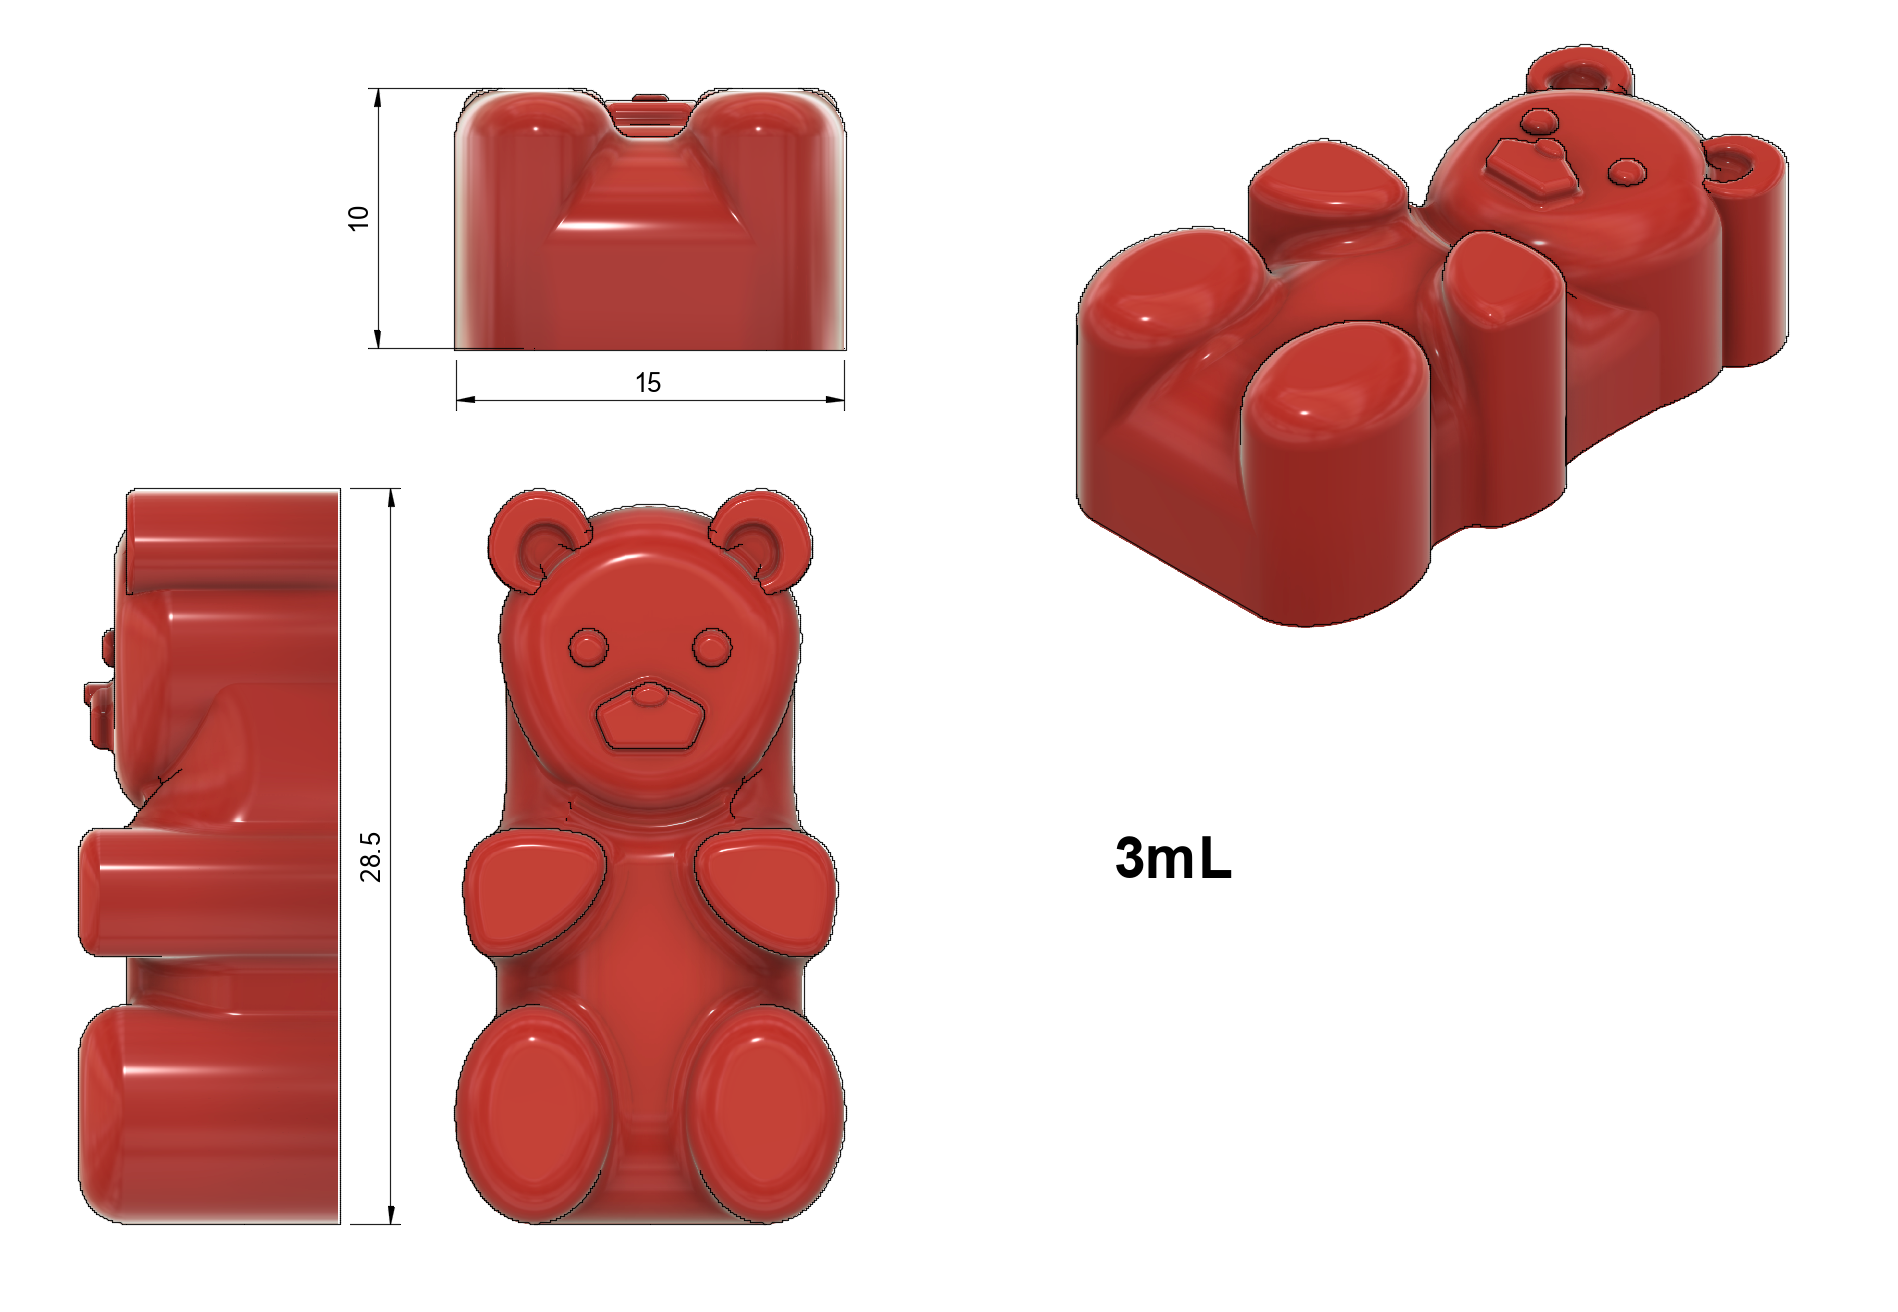 104 SHINY Gummy Bear Resin mold (3 Sizes Available) - Resin, UV Resin,  Resin Molds, Silicone Mold, Silicone Mold for Resin